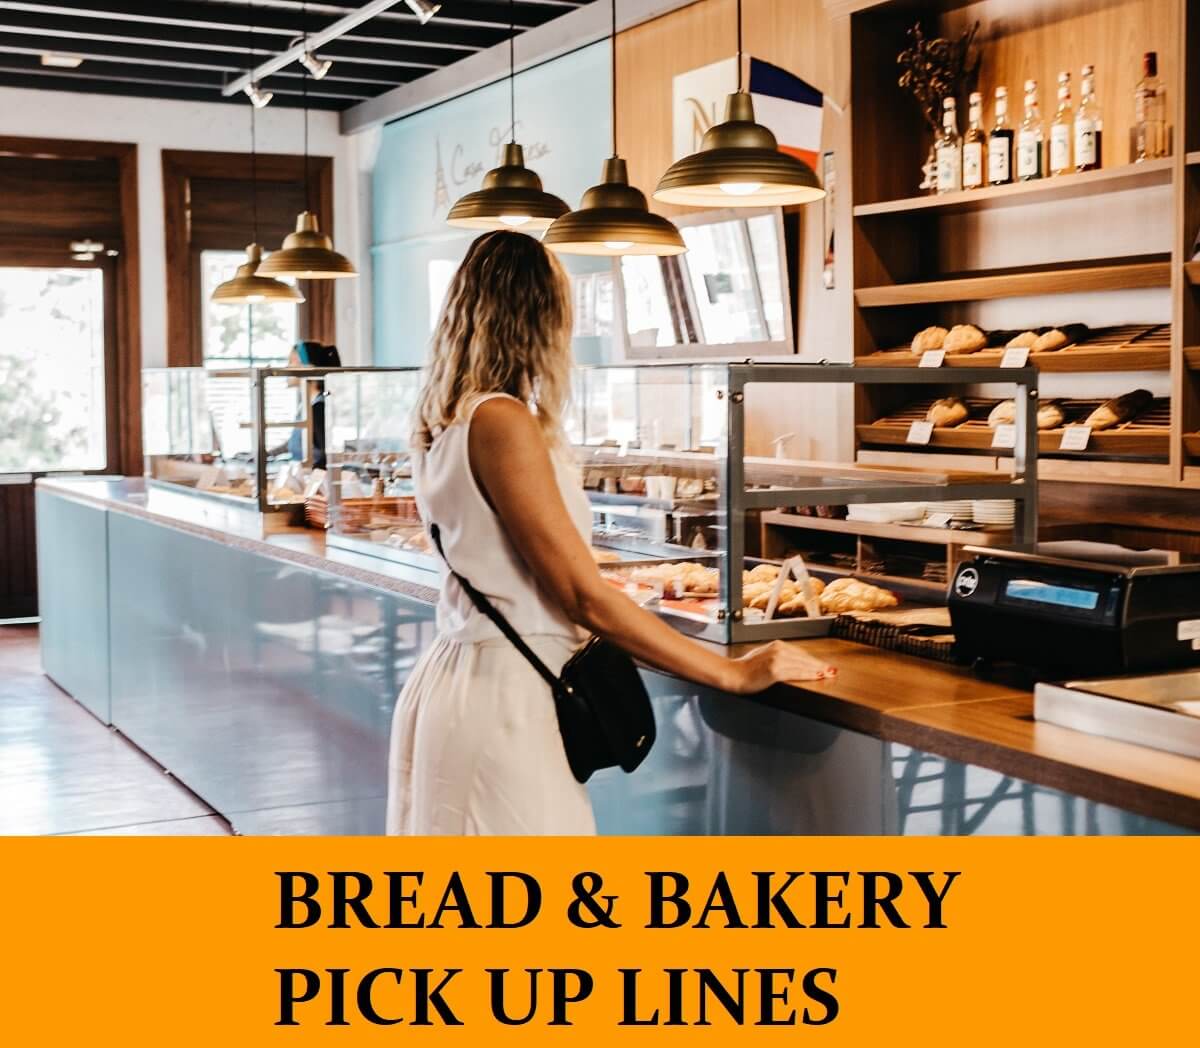 Pick Up Lines About Bread and Bakery